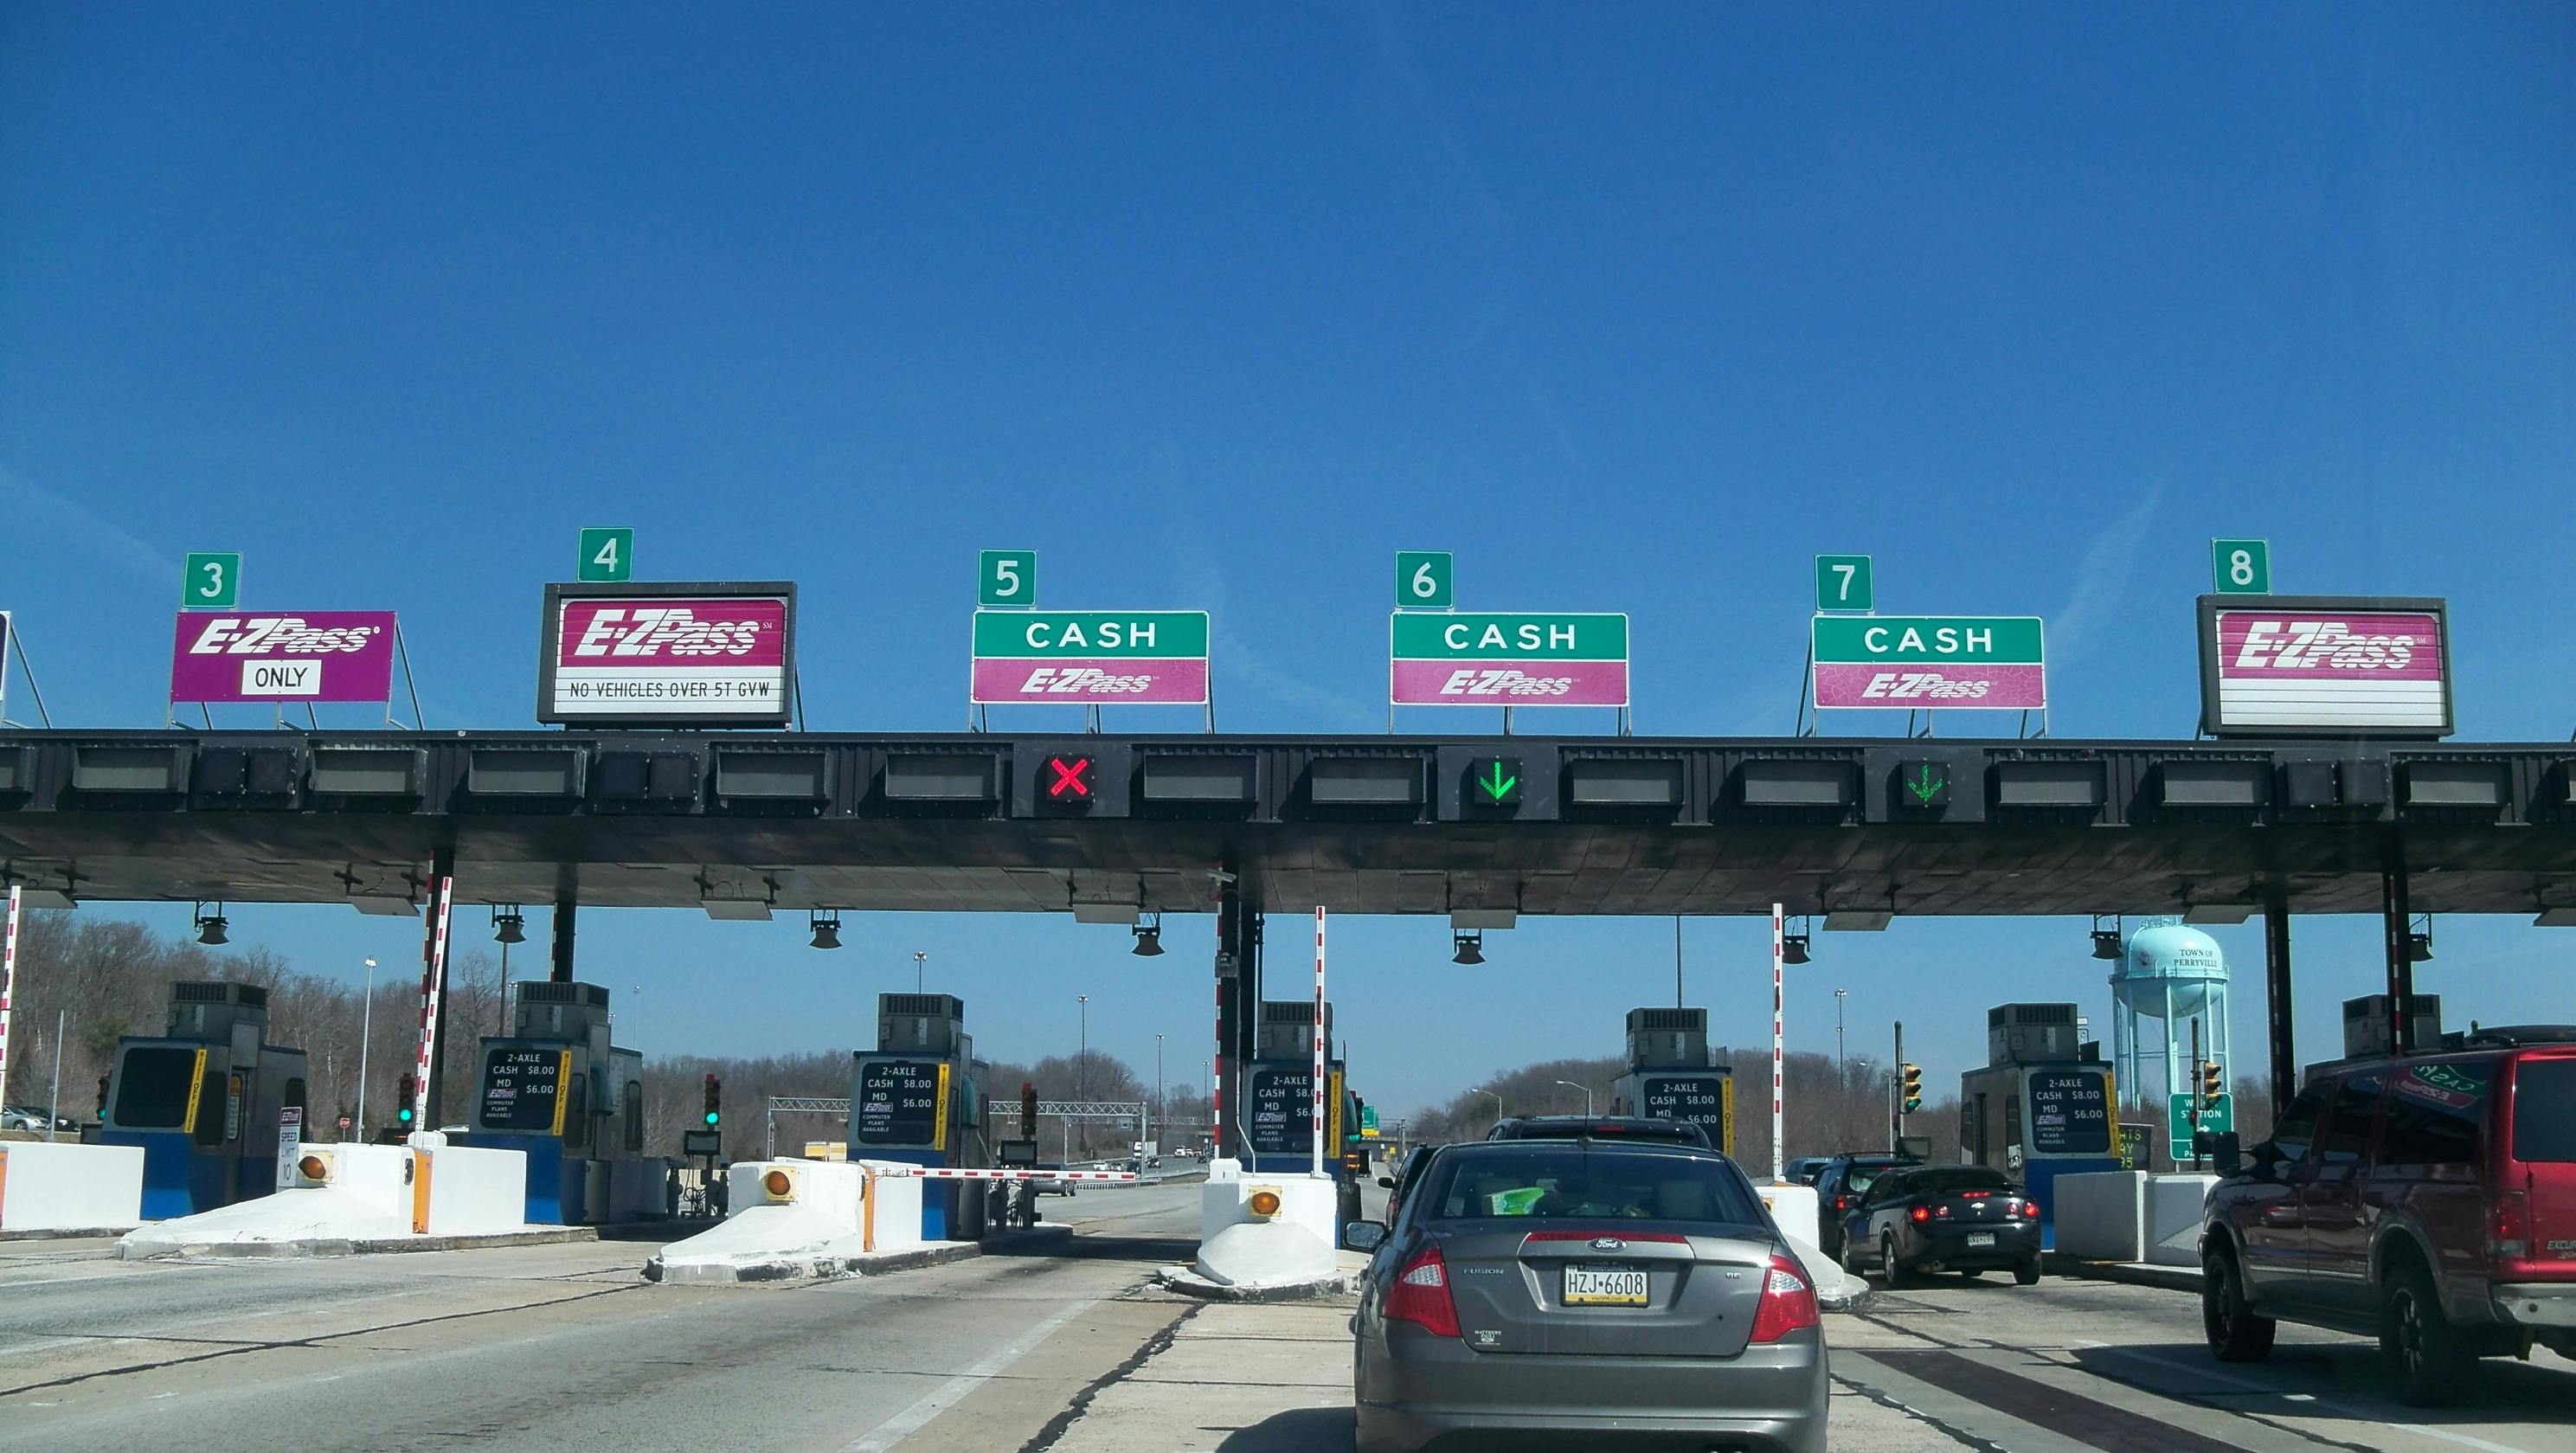 A toll booth station